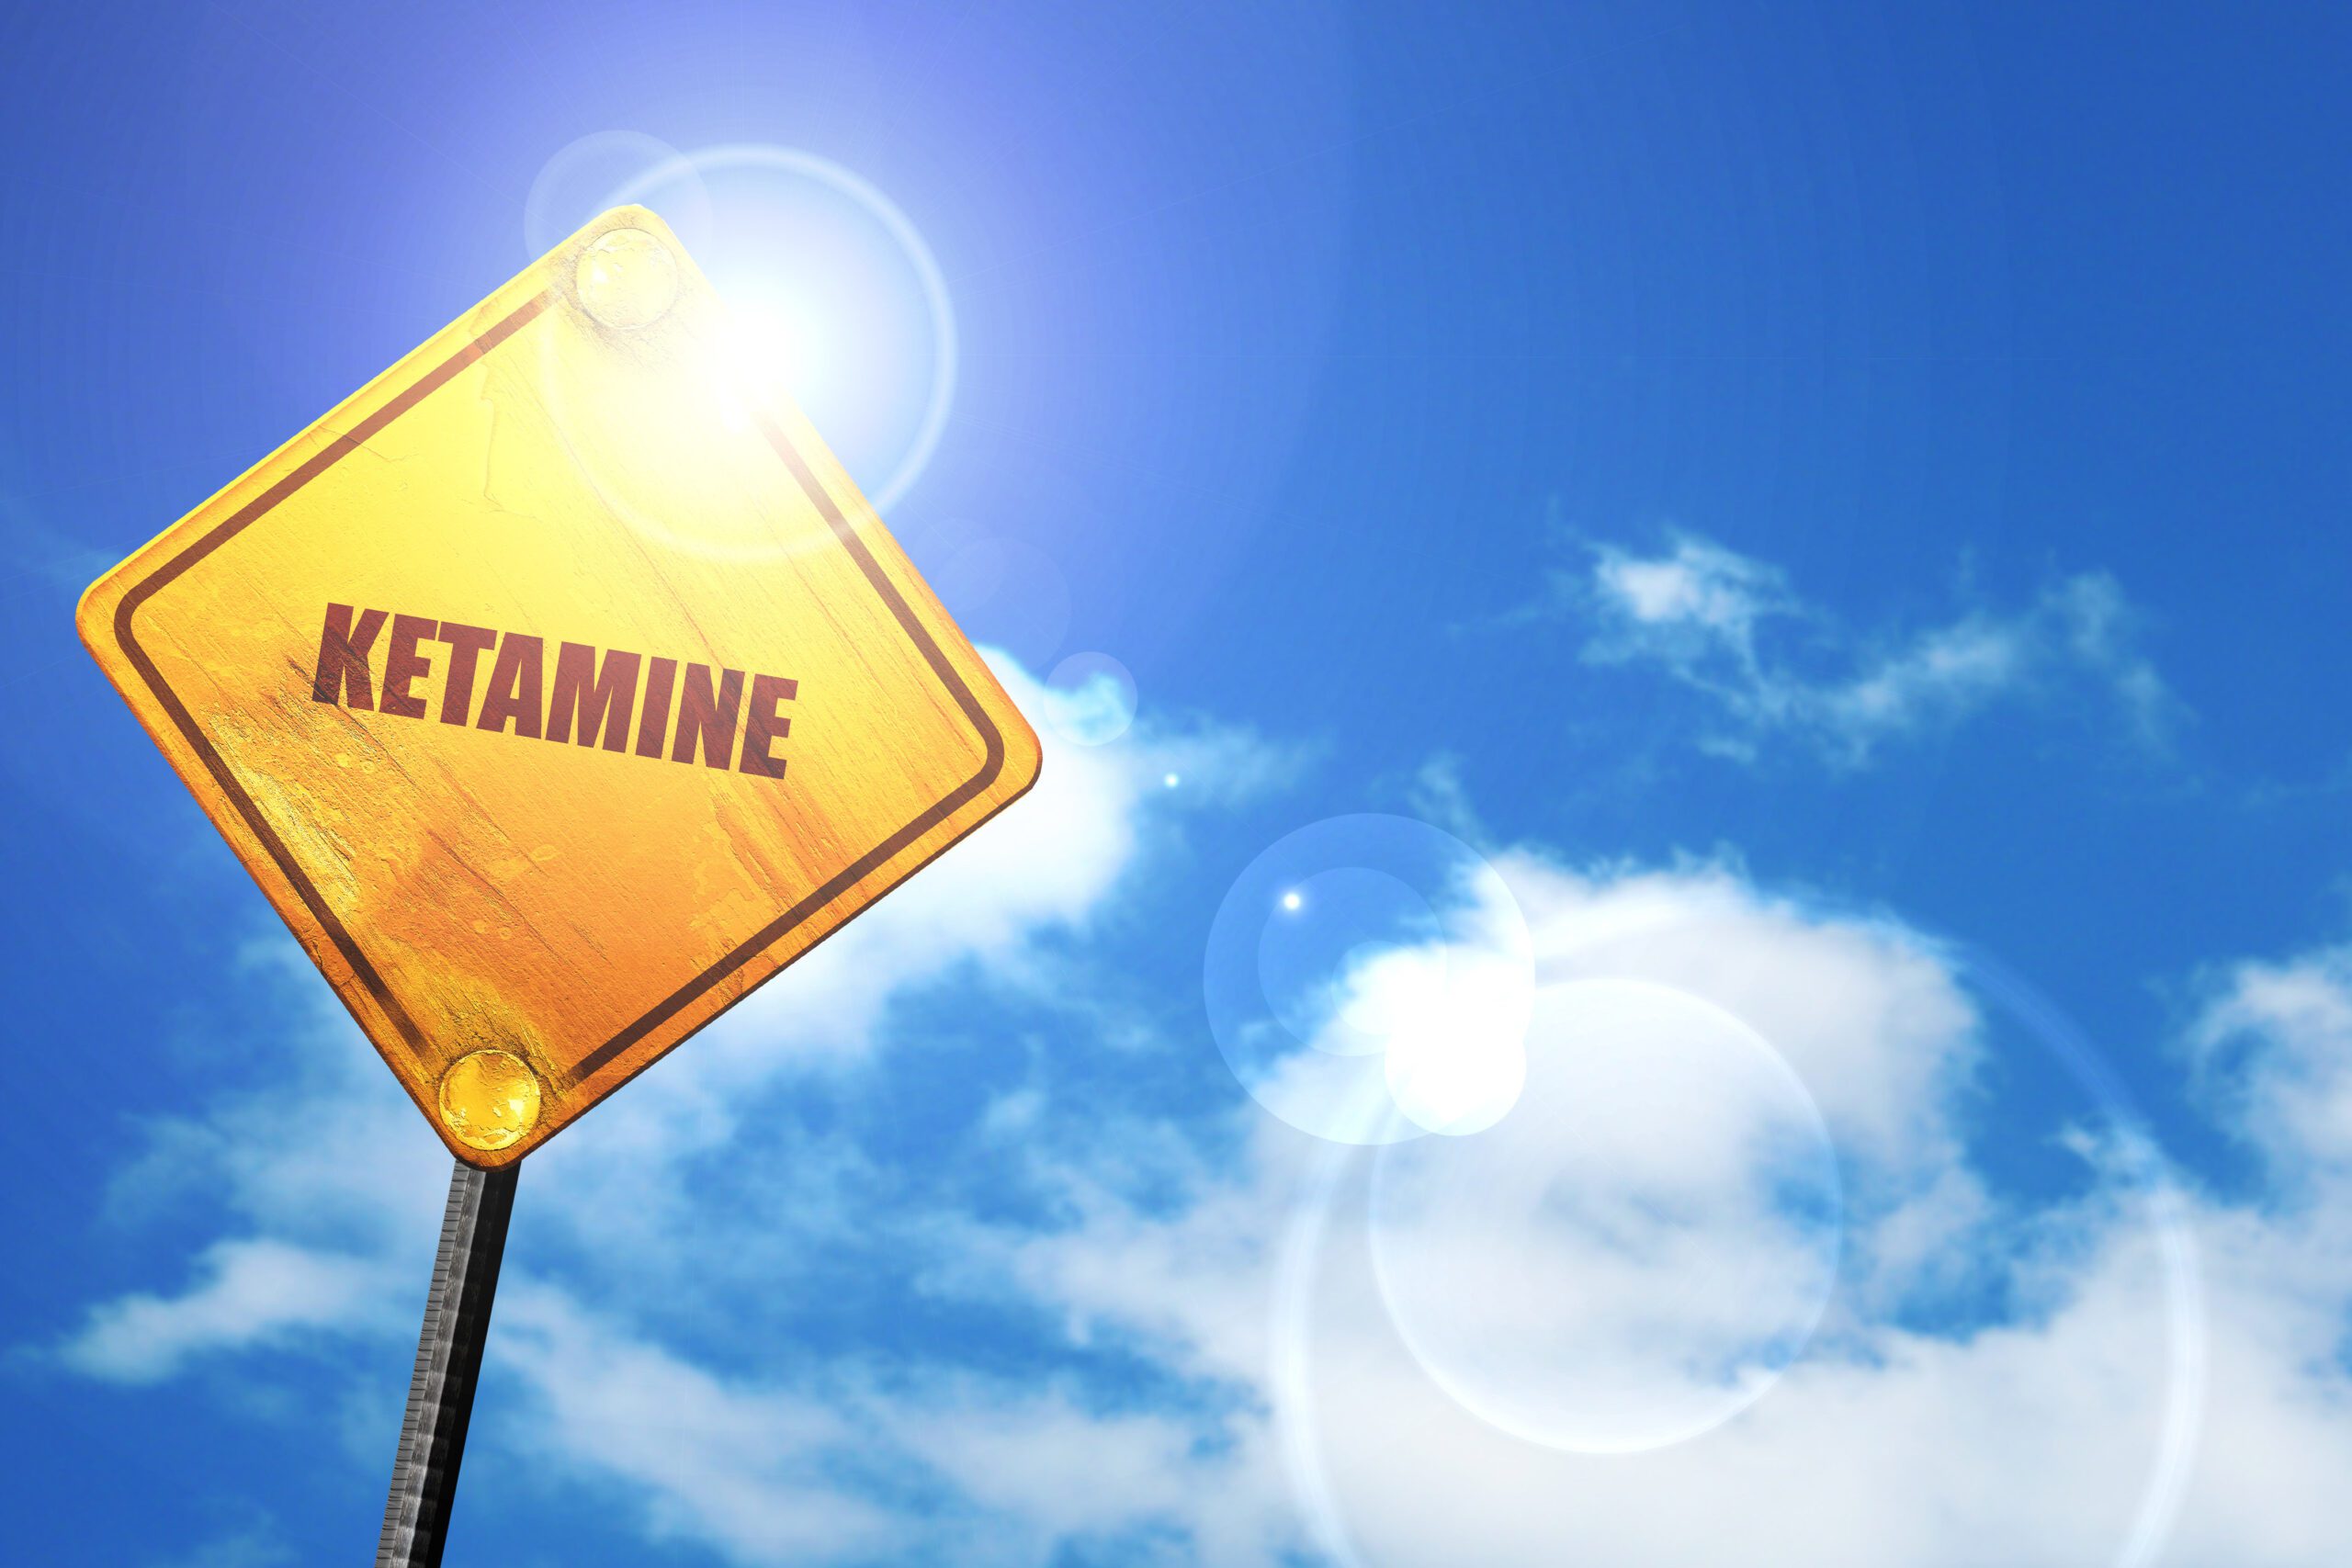 Pediatric Pain Control in EMS – Is Ketamine the Next Big Thing?